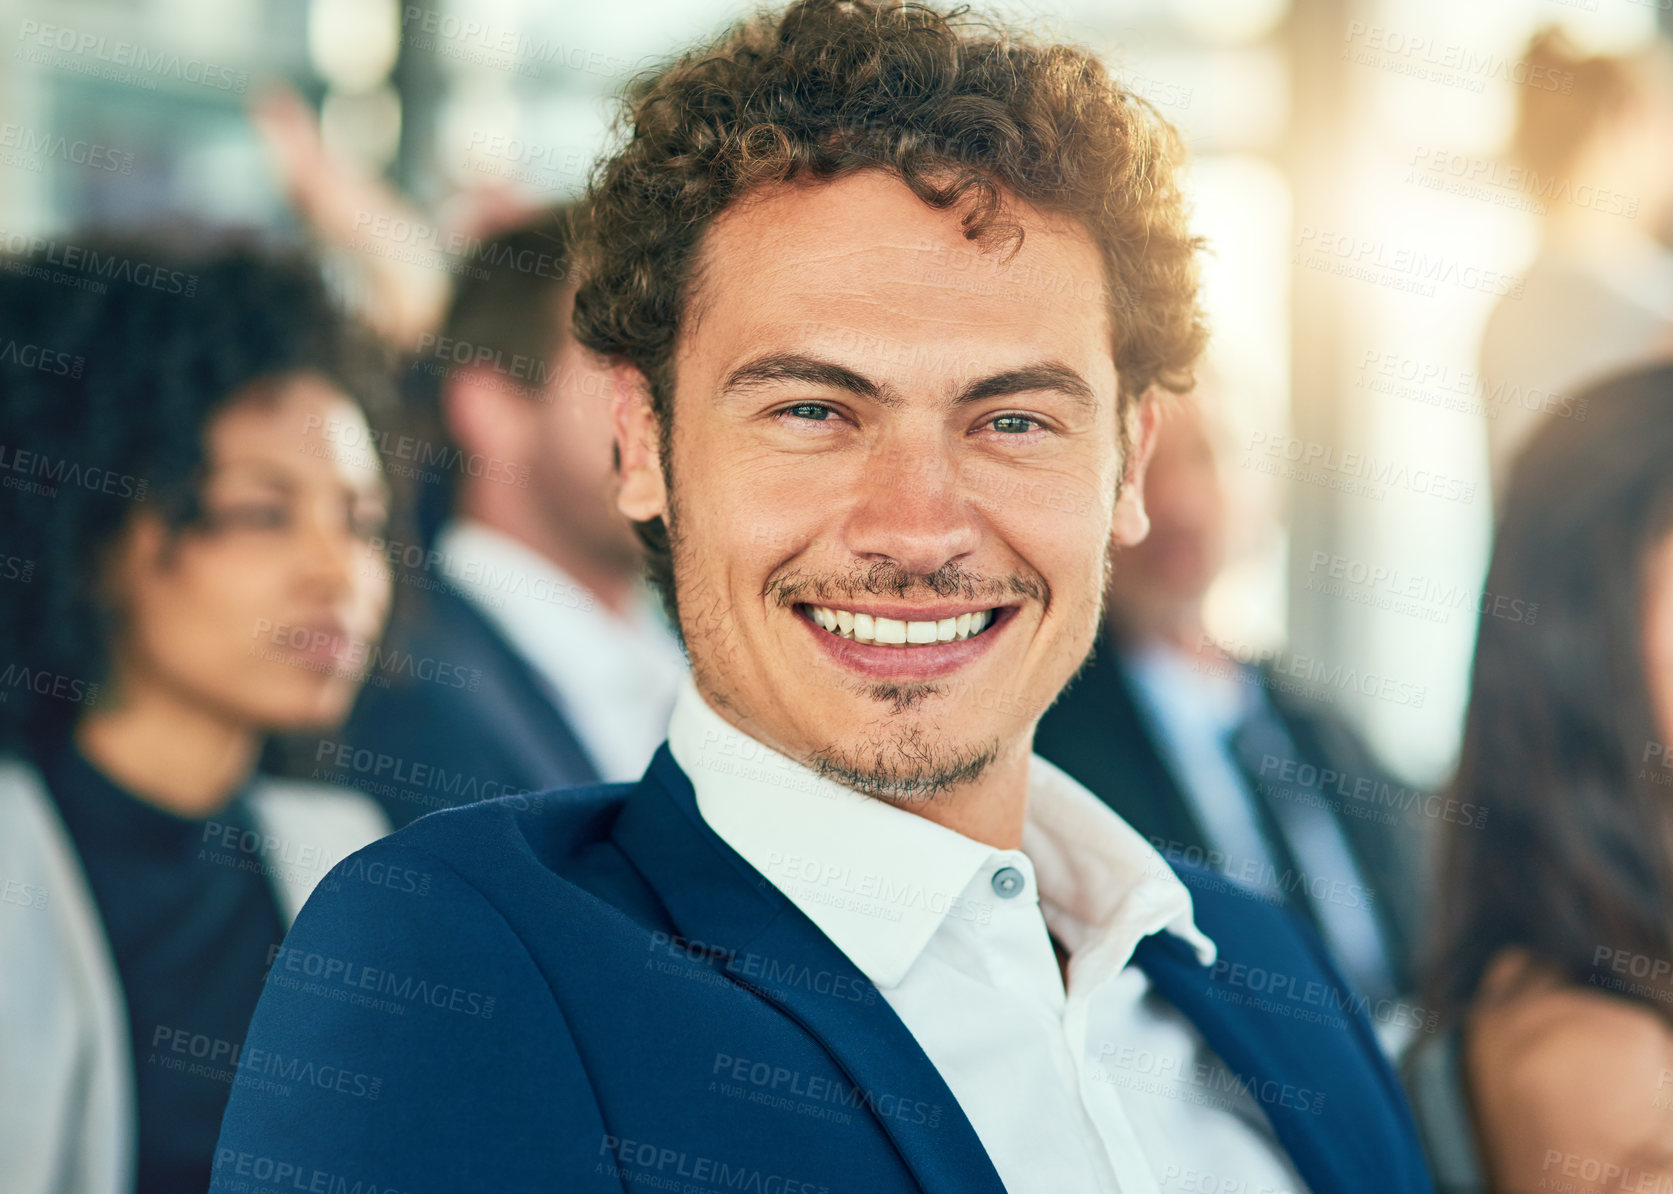 Buy stock photo Cropped portrait of a handsome young businessman sitting in a conference room during a seminar